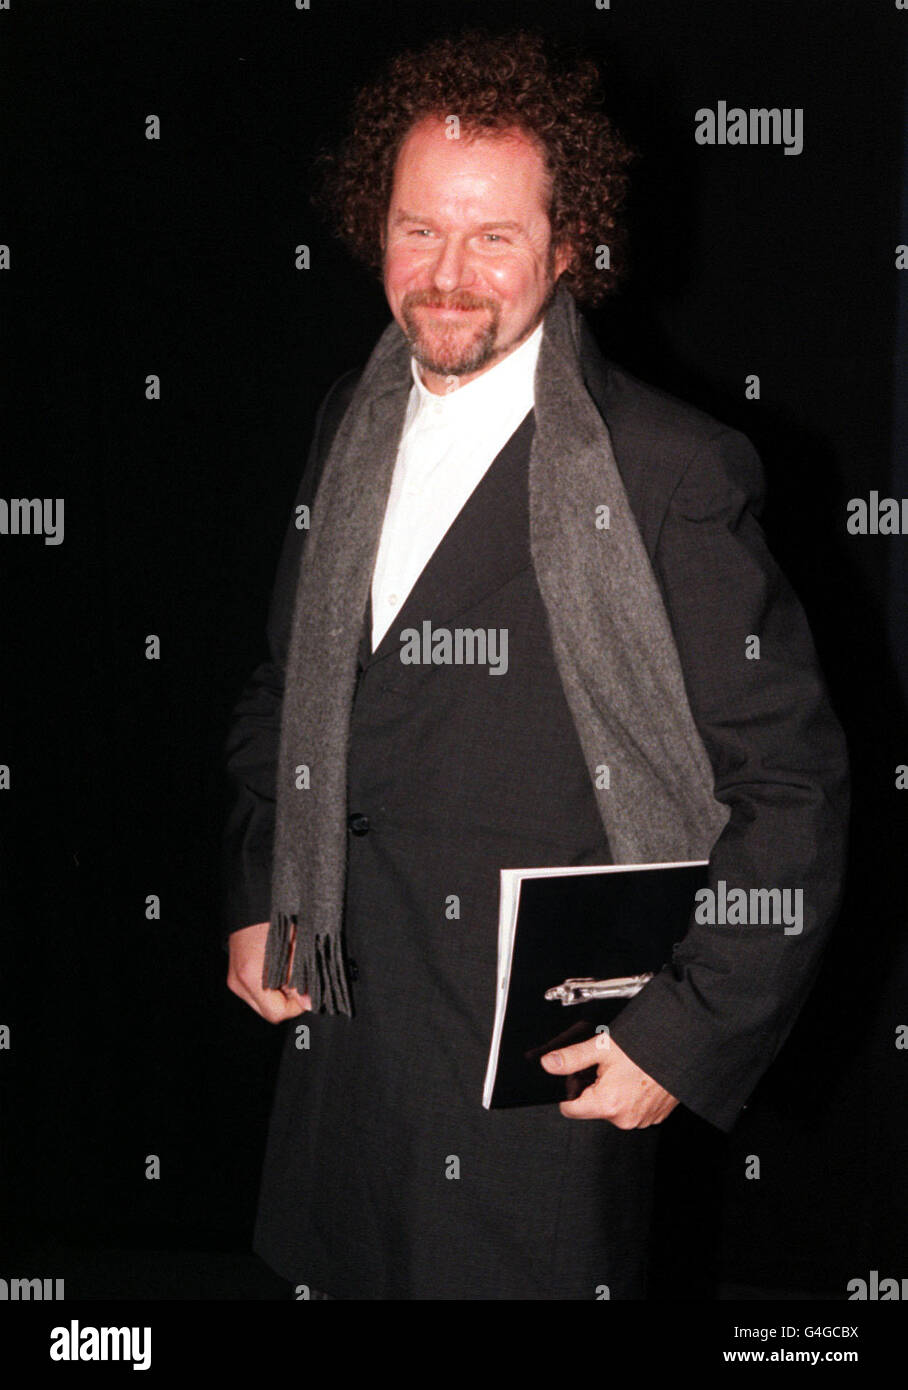 PA NEWS PHOTO 5/12/98 FILM DIRECTOR MIKE FIGGIS ARRIVES AT THE EUROPEAN FILM AWARDS, HELD AT LONDON'S OLD VIC THEATRE. Stock Photo